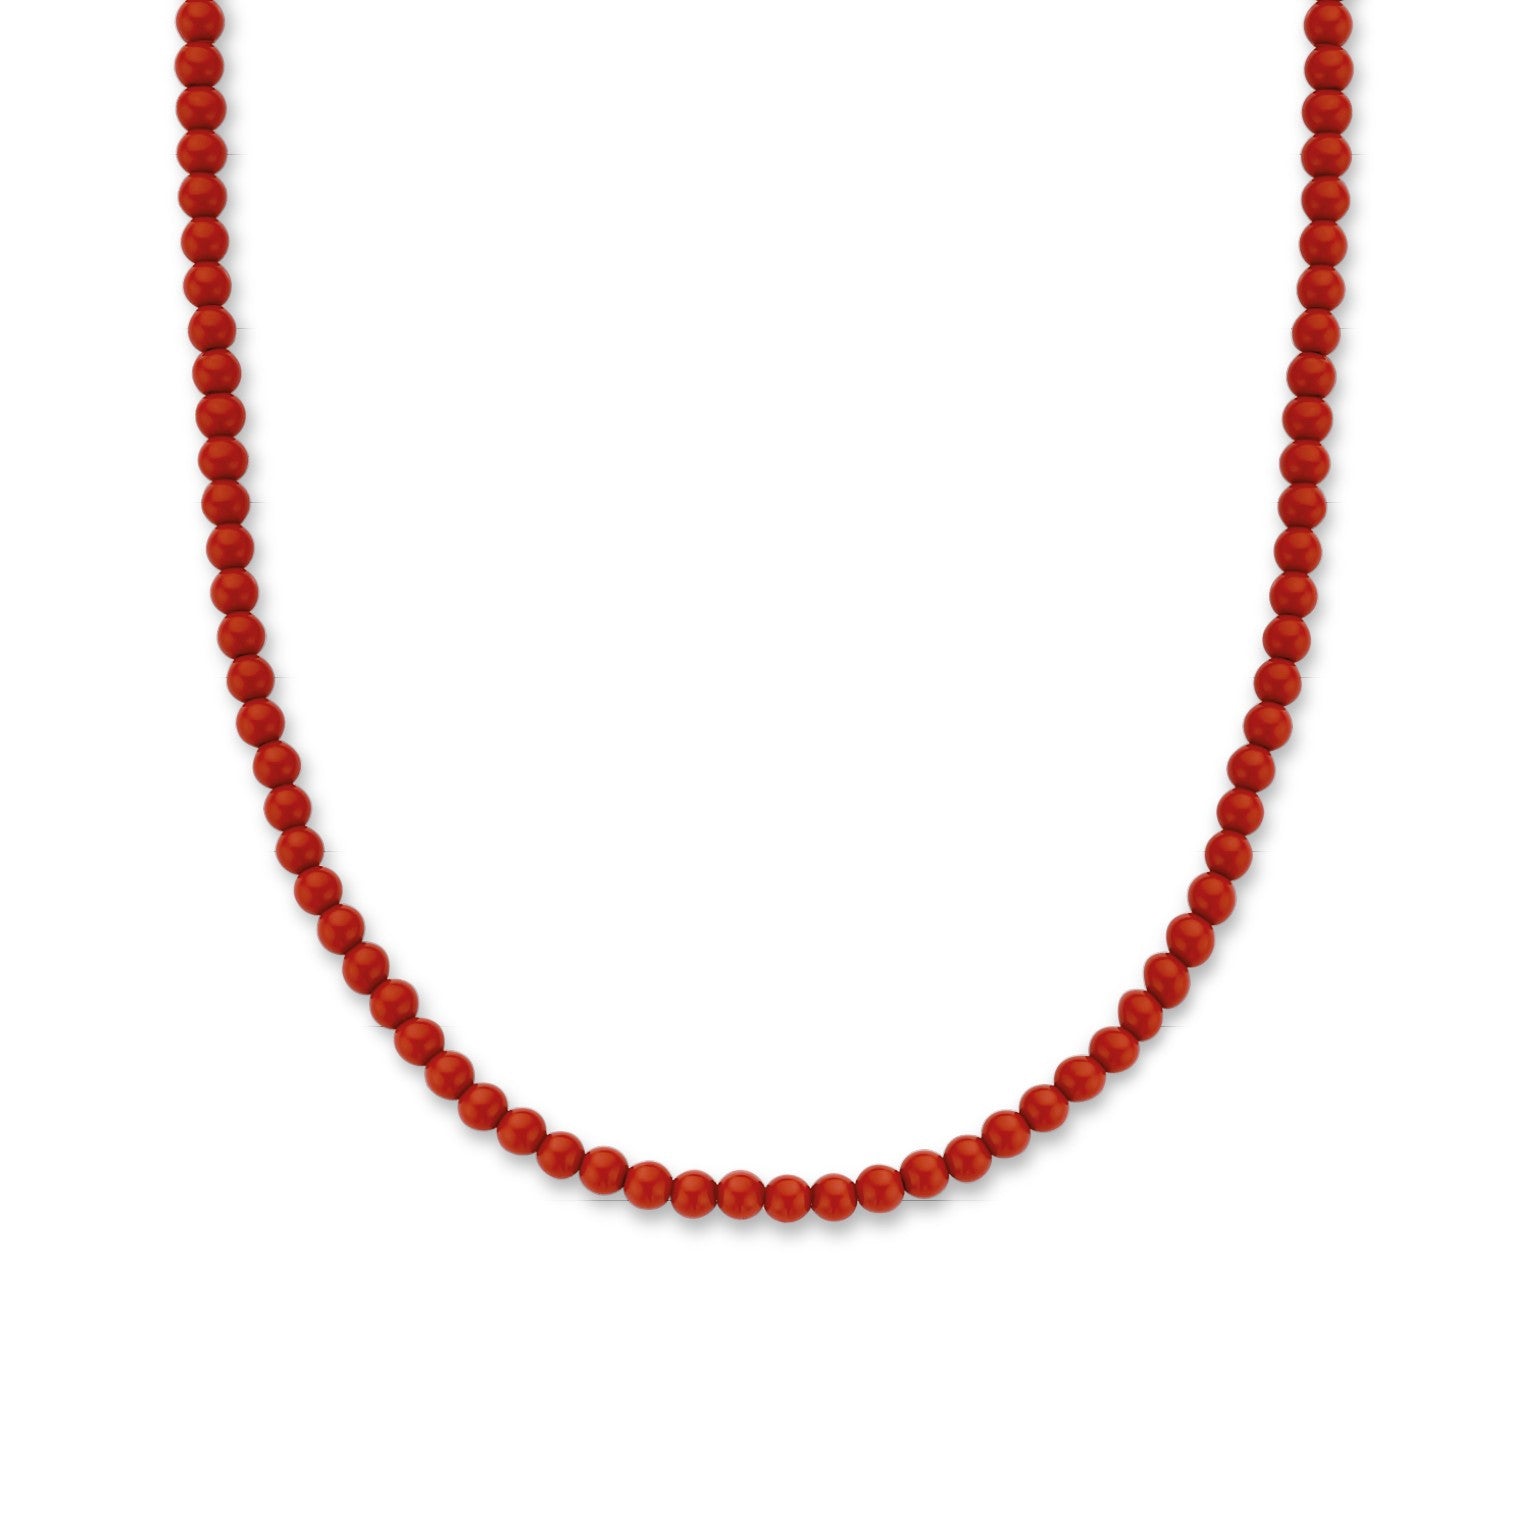 Radiant Coral 4mm Bead Necklace